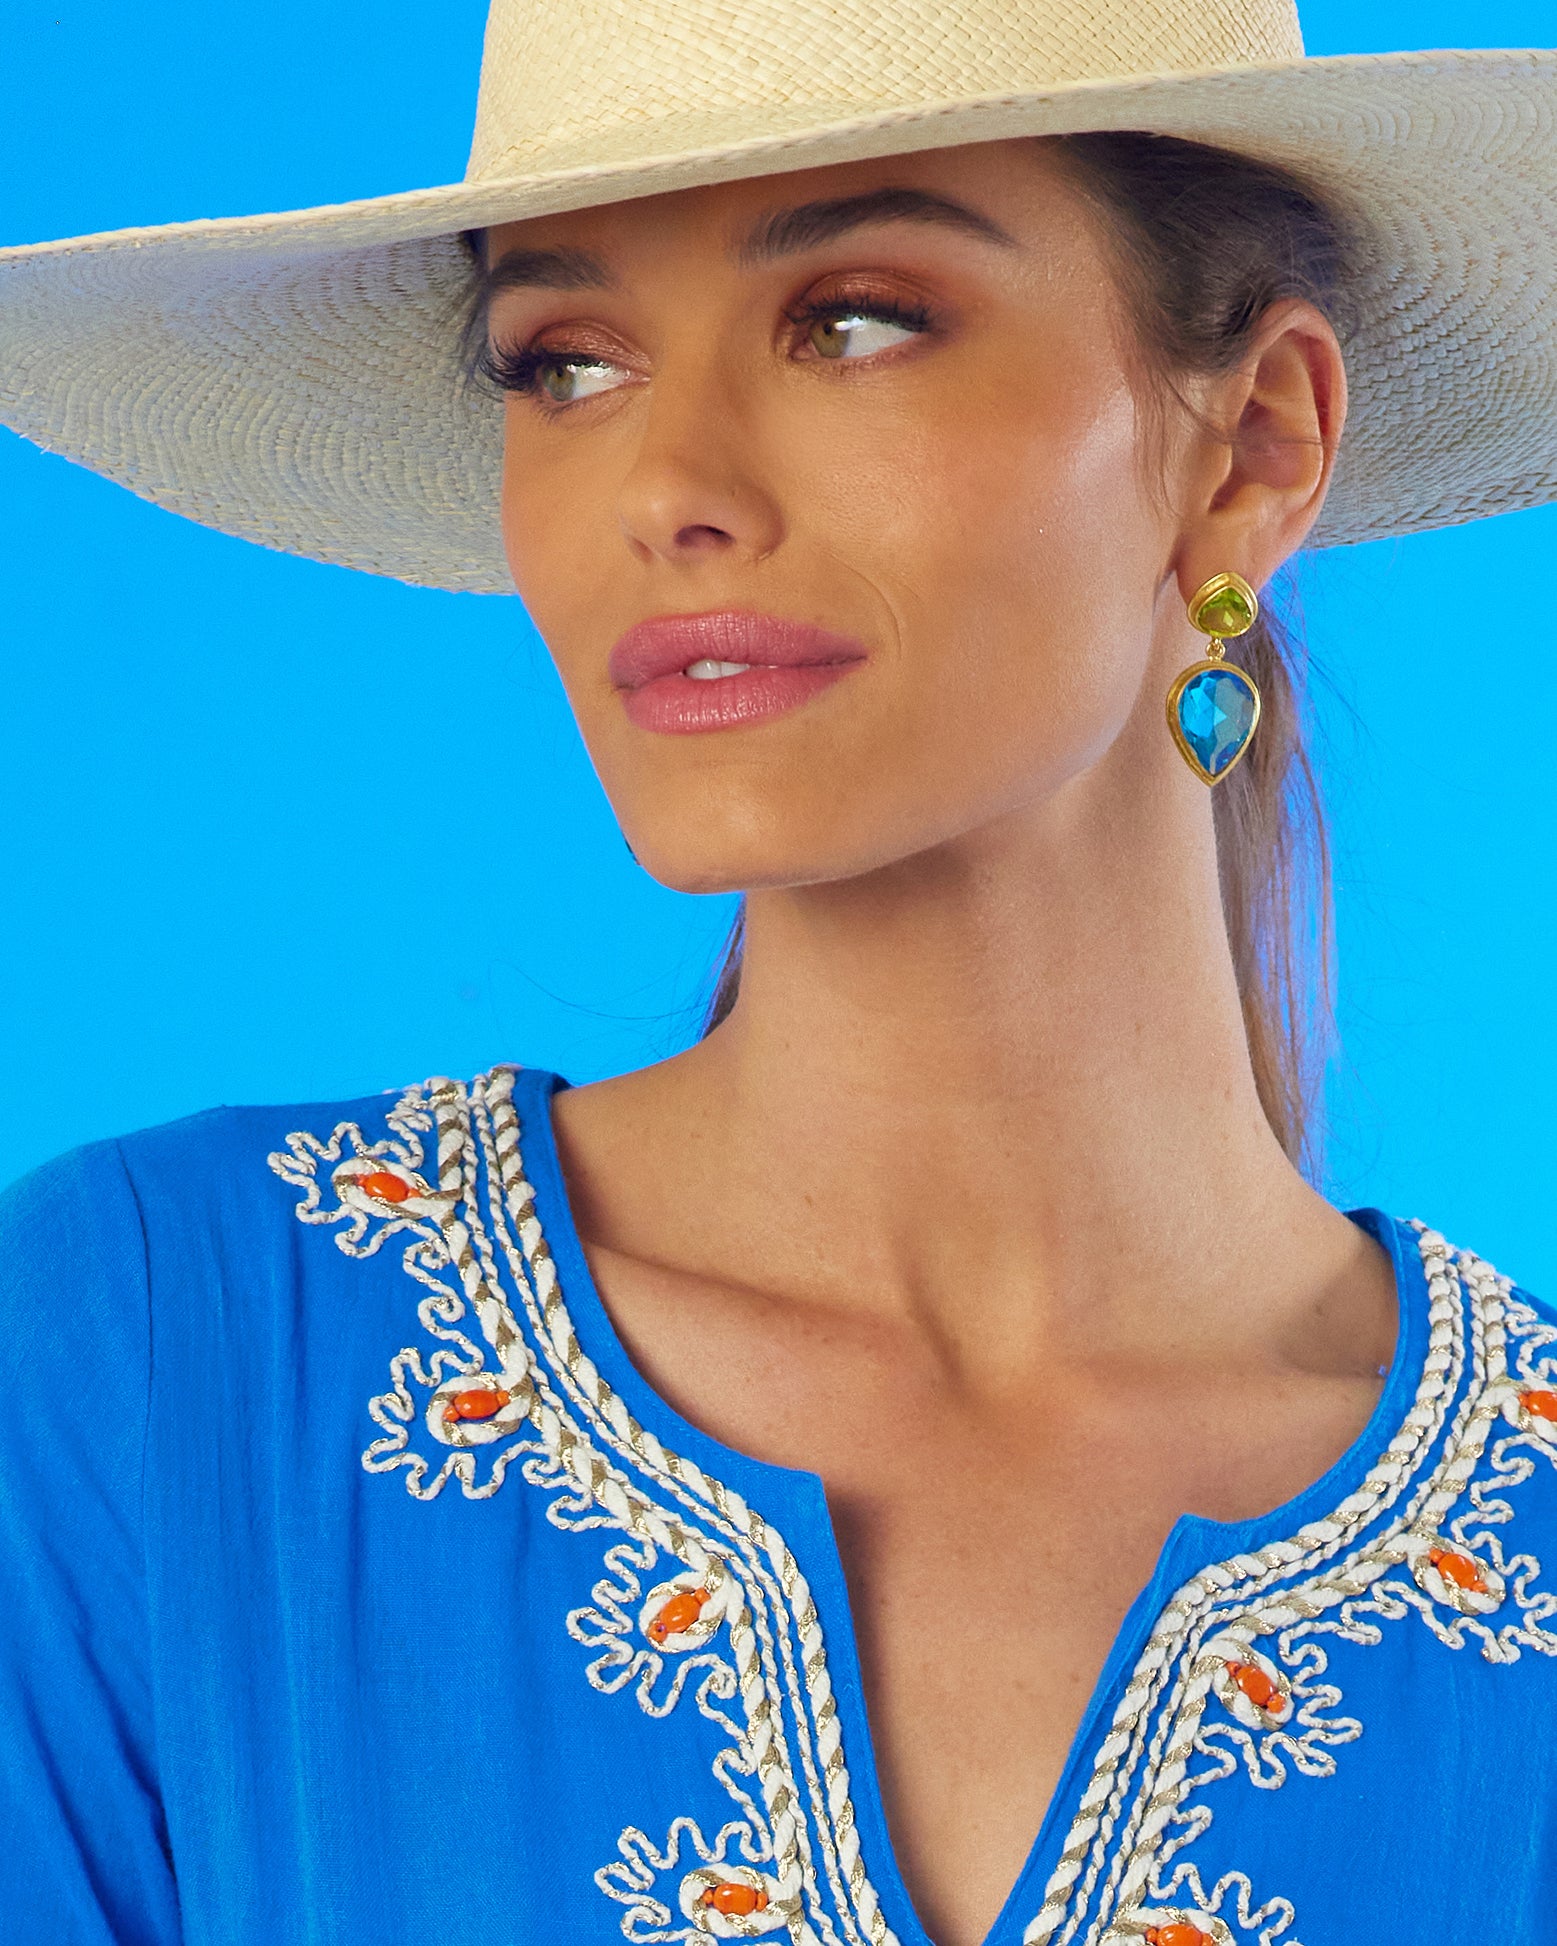 Hadley Tear Drop Earrings in Lime Green and Radiant Blue worn with the Mallorca Tunic in Cobalt Blue